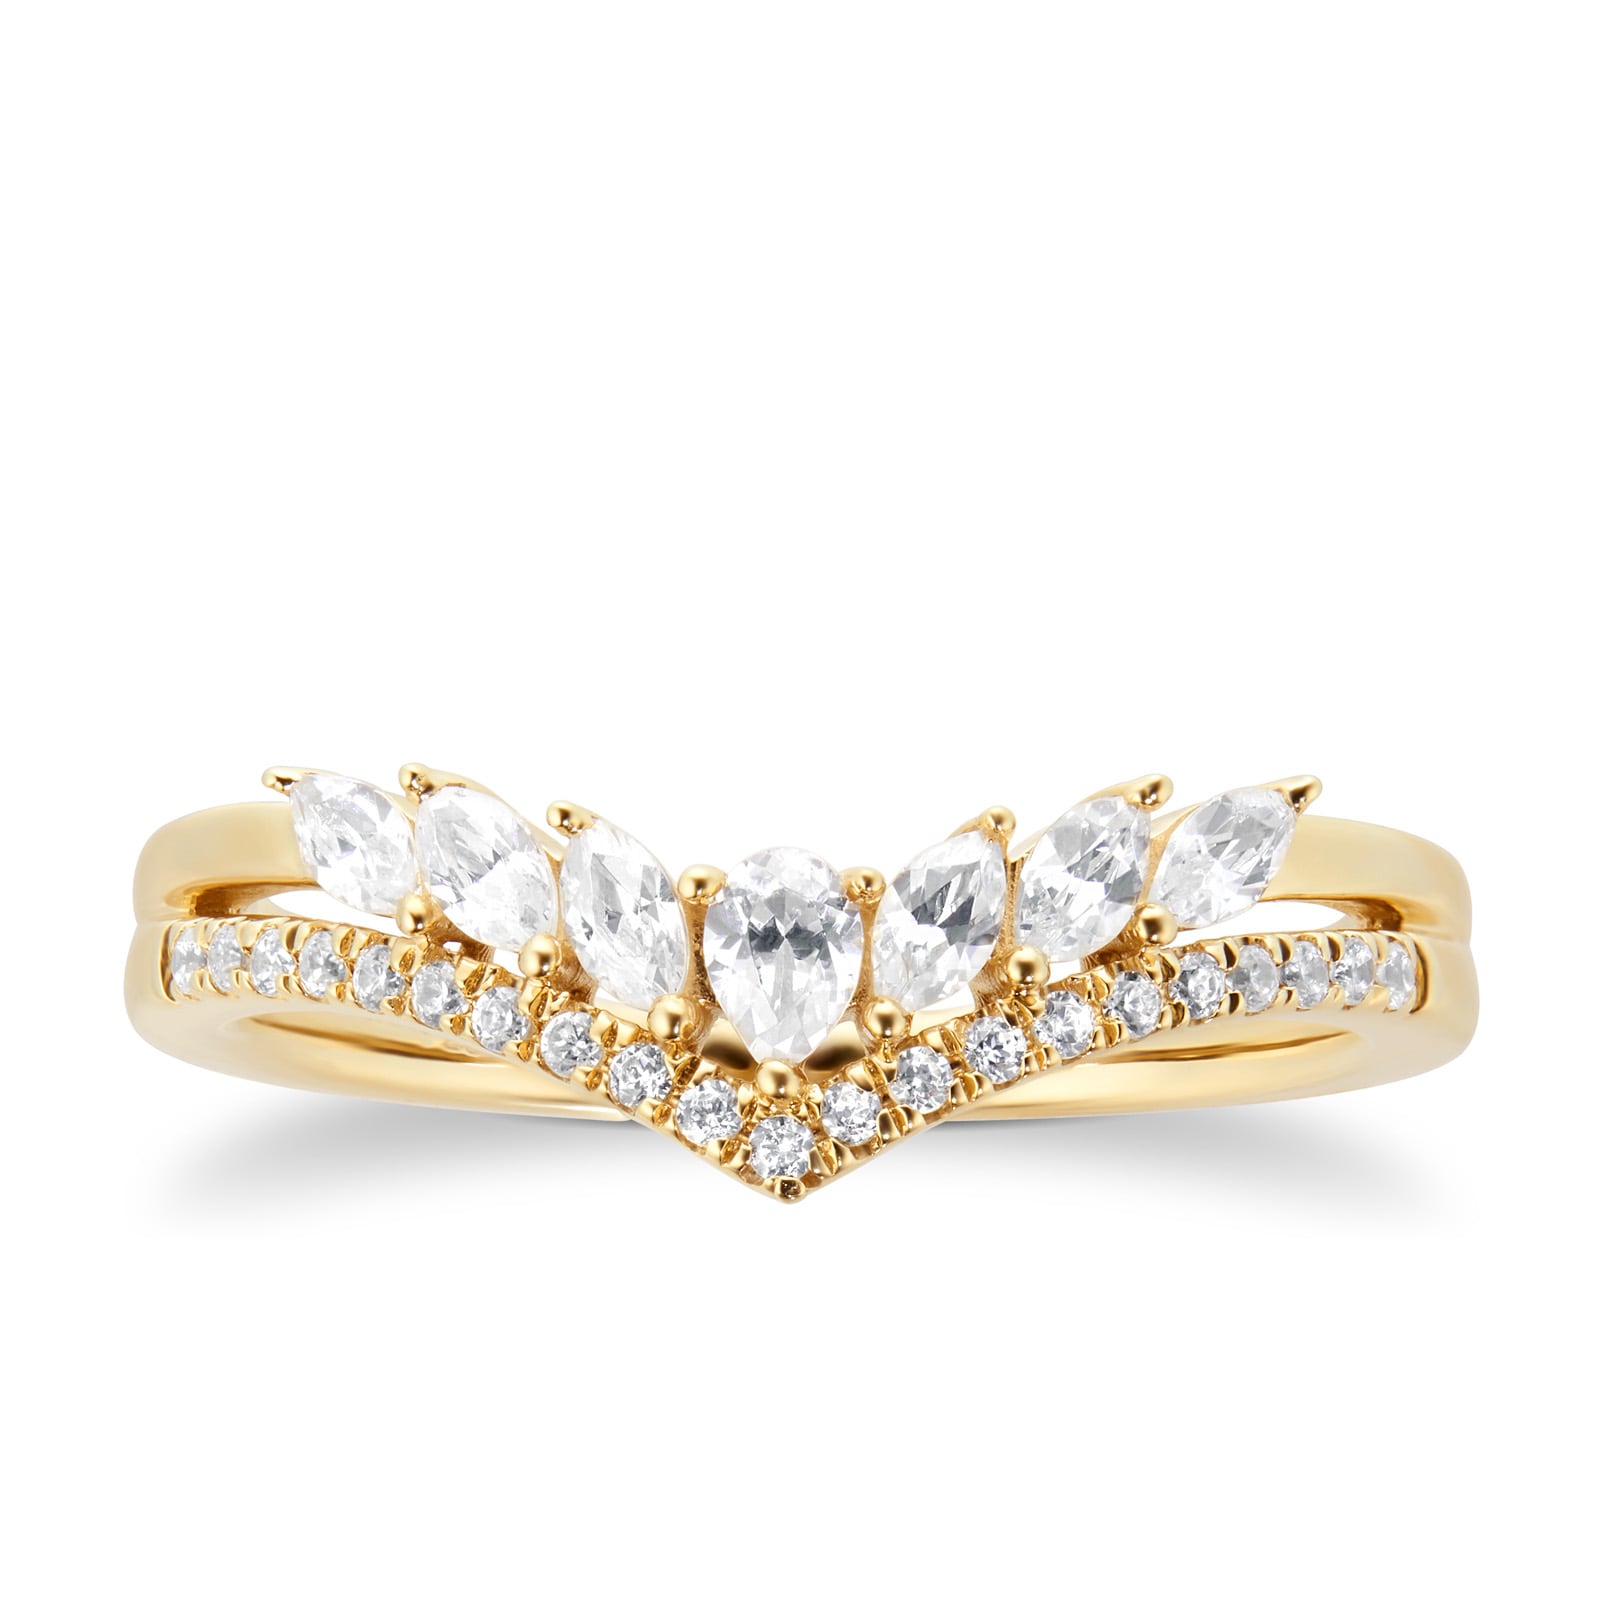 18ct Yellow Gold 0.40ct Diamond Pear & Marquise Double Row Wedding Band - Ring Size S.5